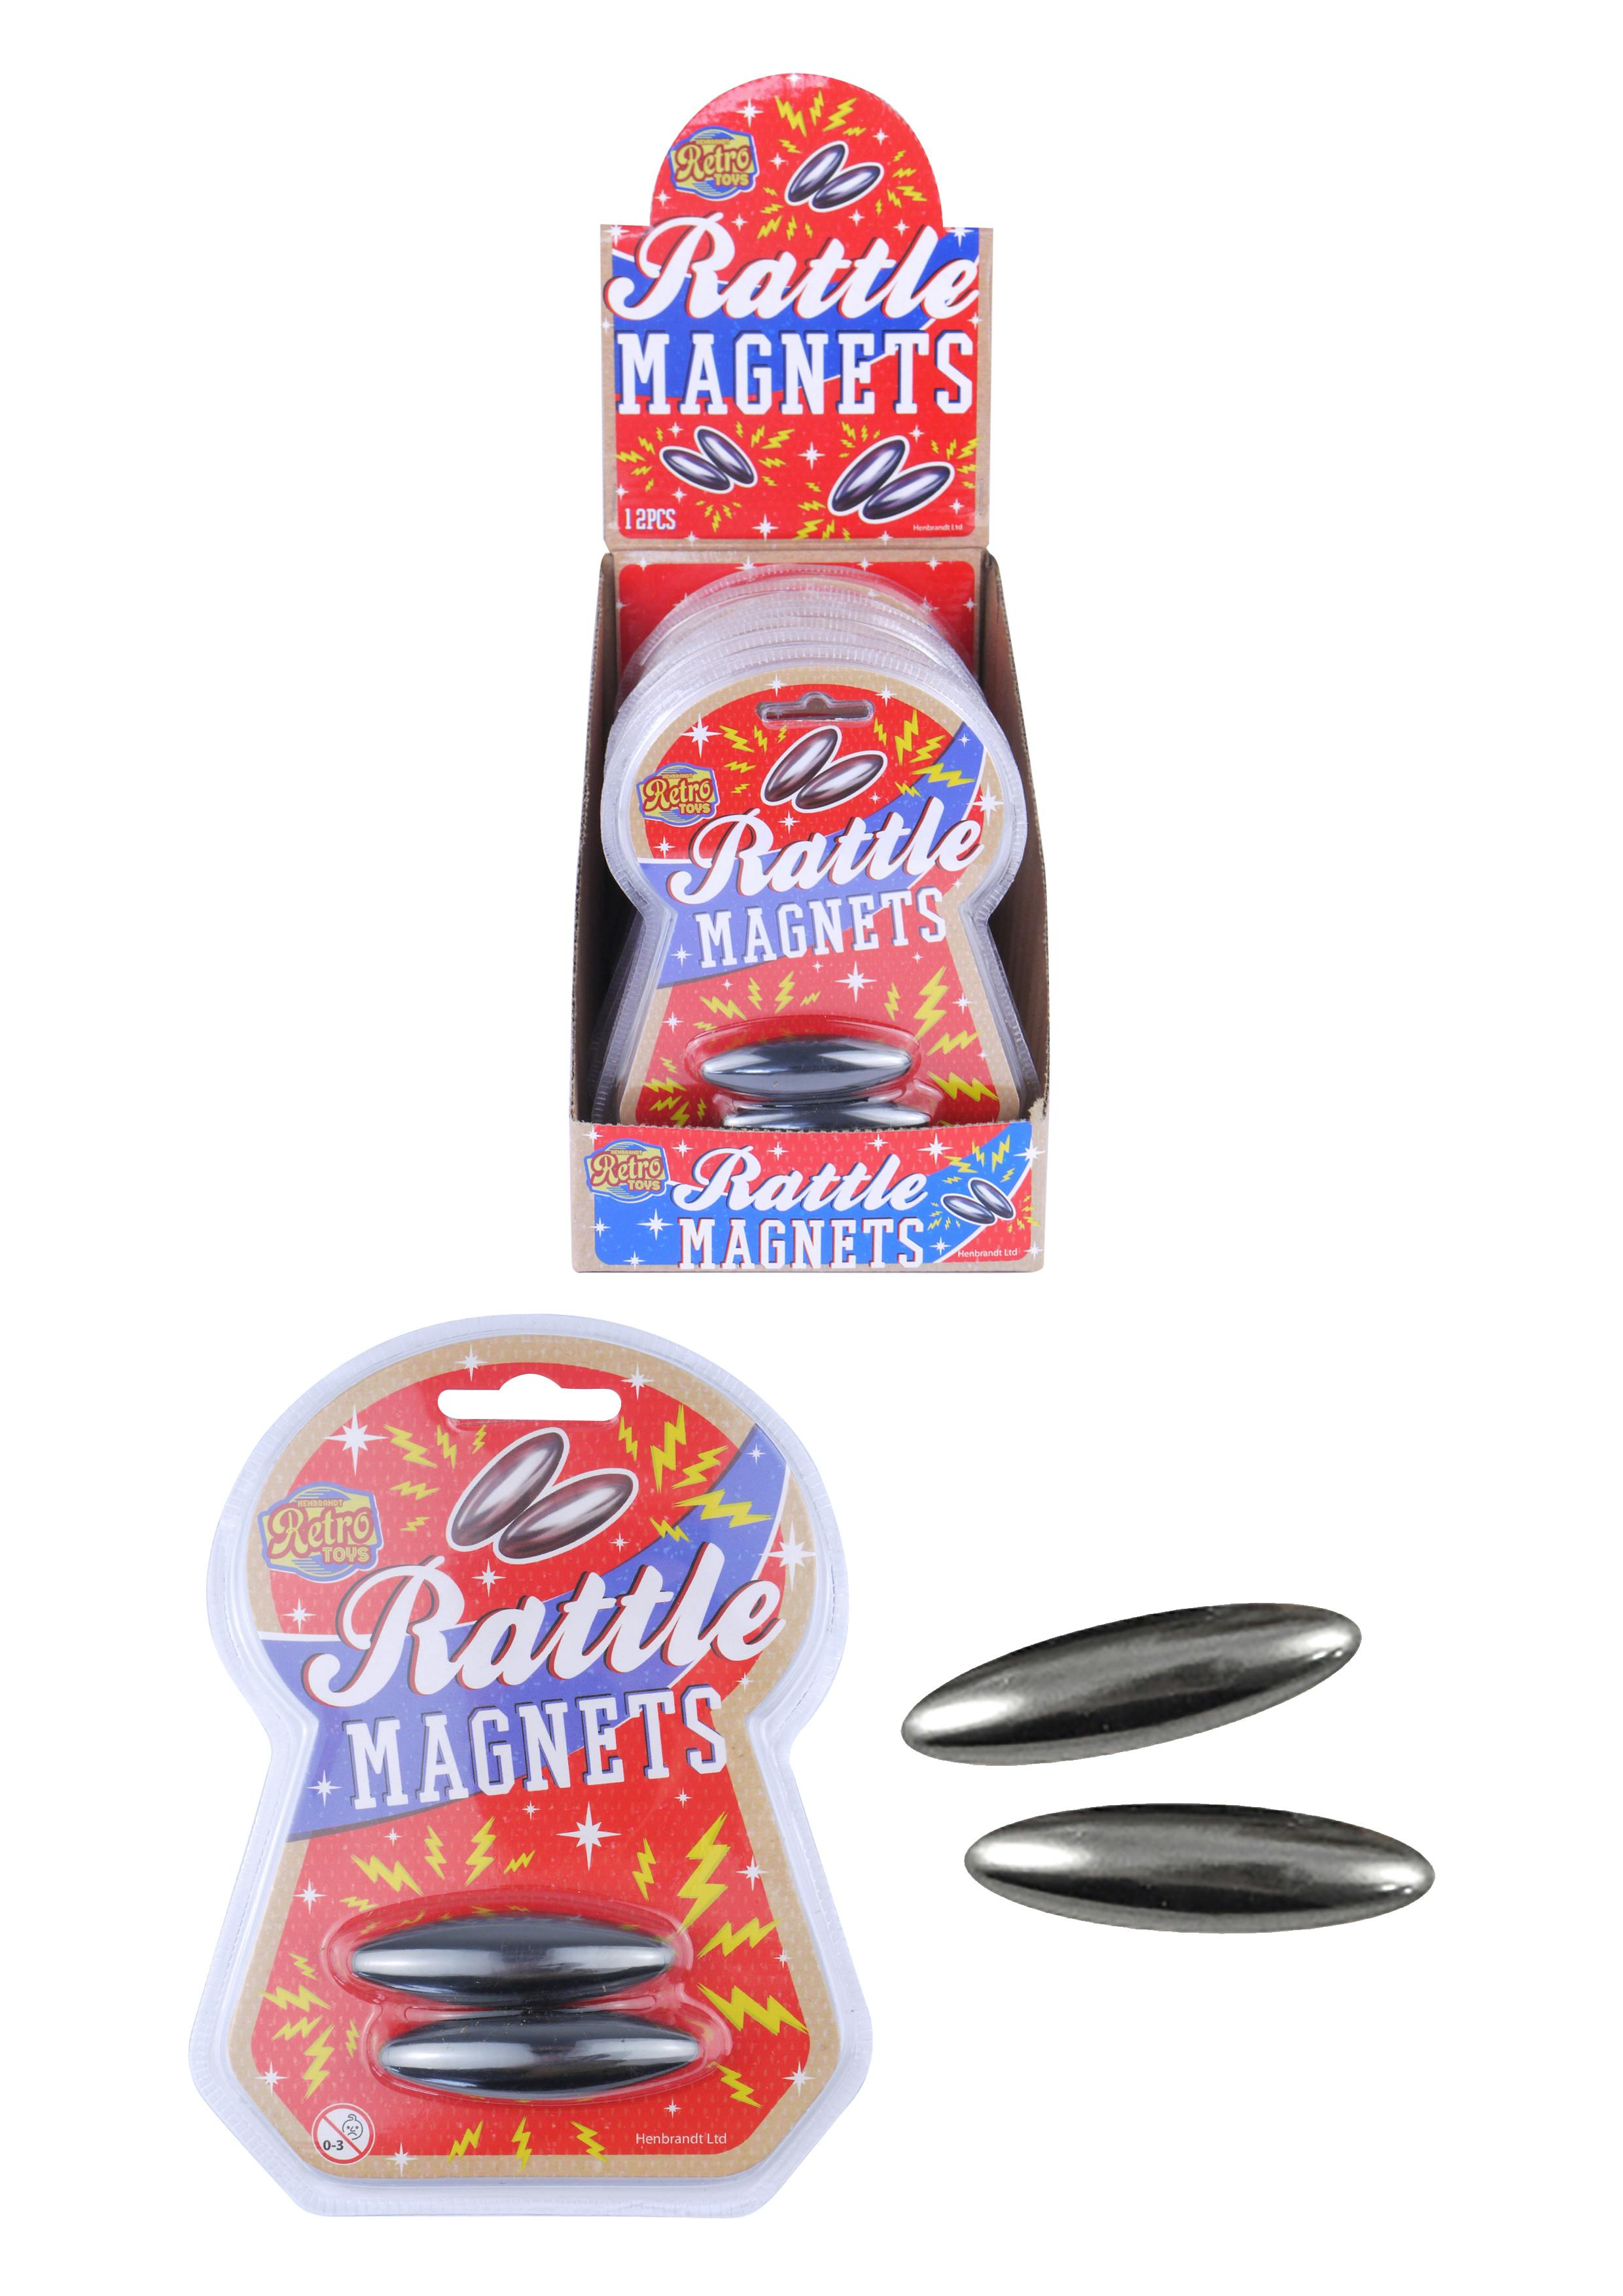 Rattle magnets - Product image